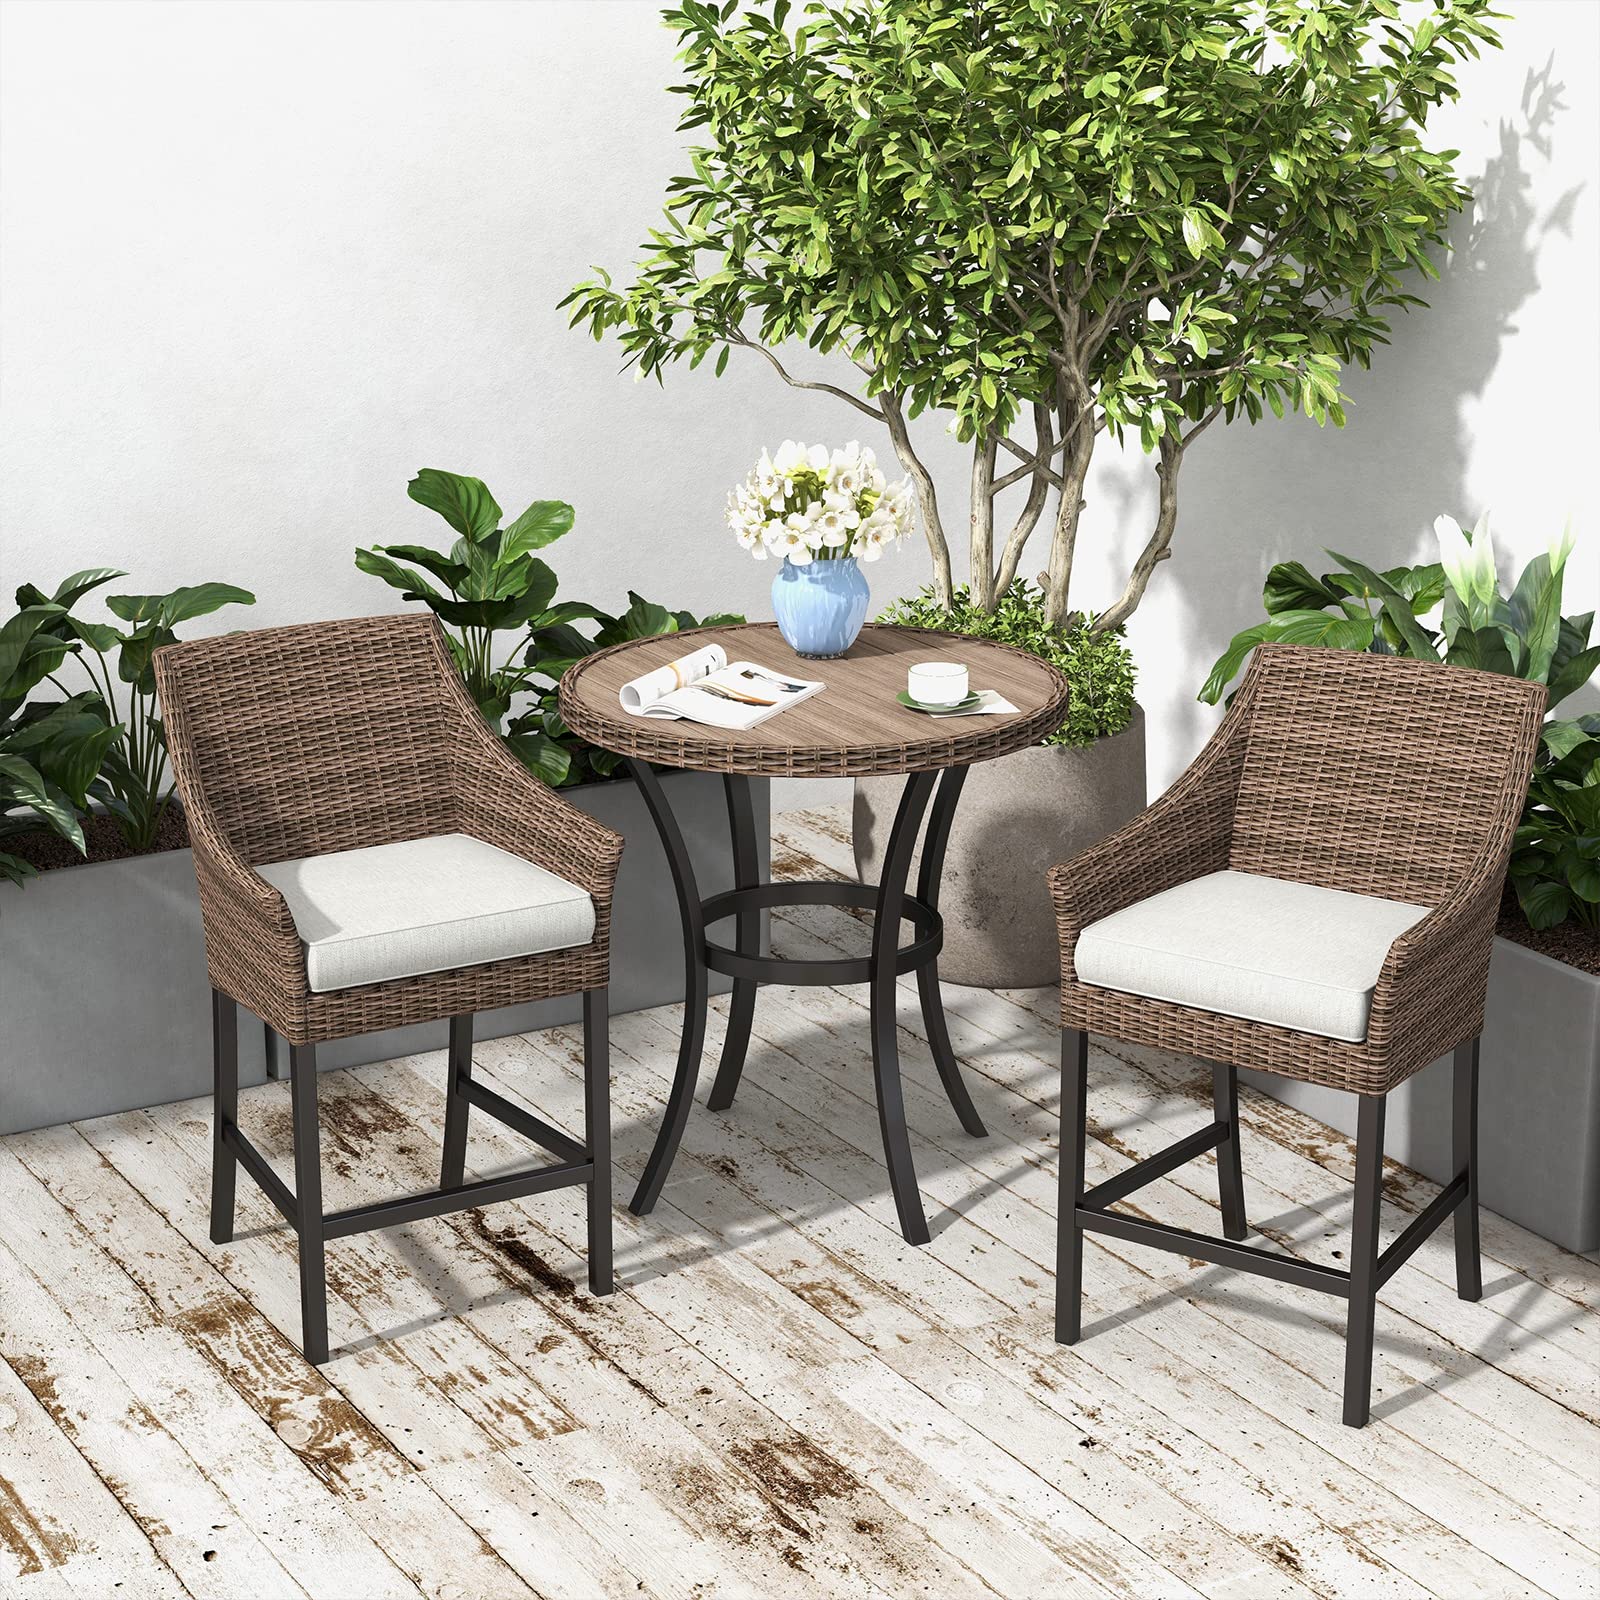 3-Piece Outdoor All-Weather Wicker Bar Stools Set with Olefin Cushions and Faux-Wood Table Top